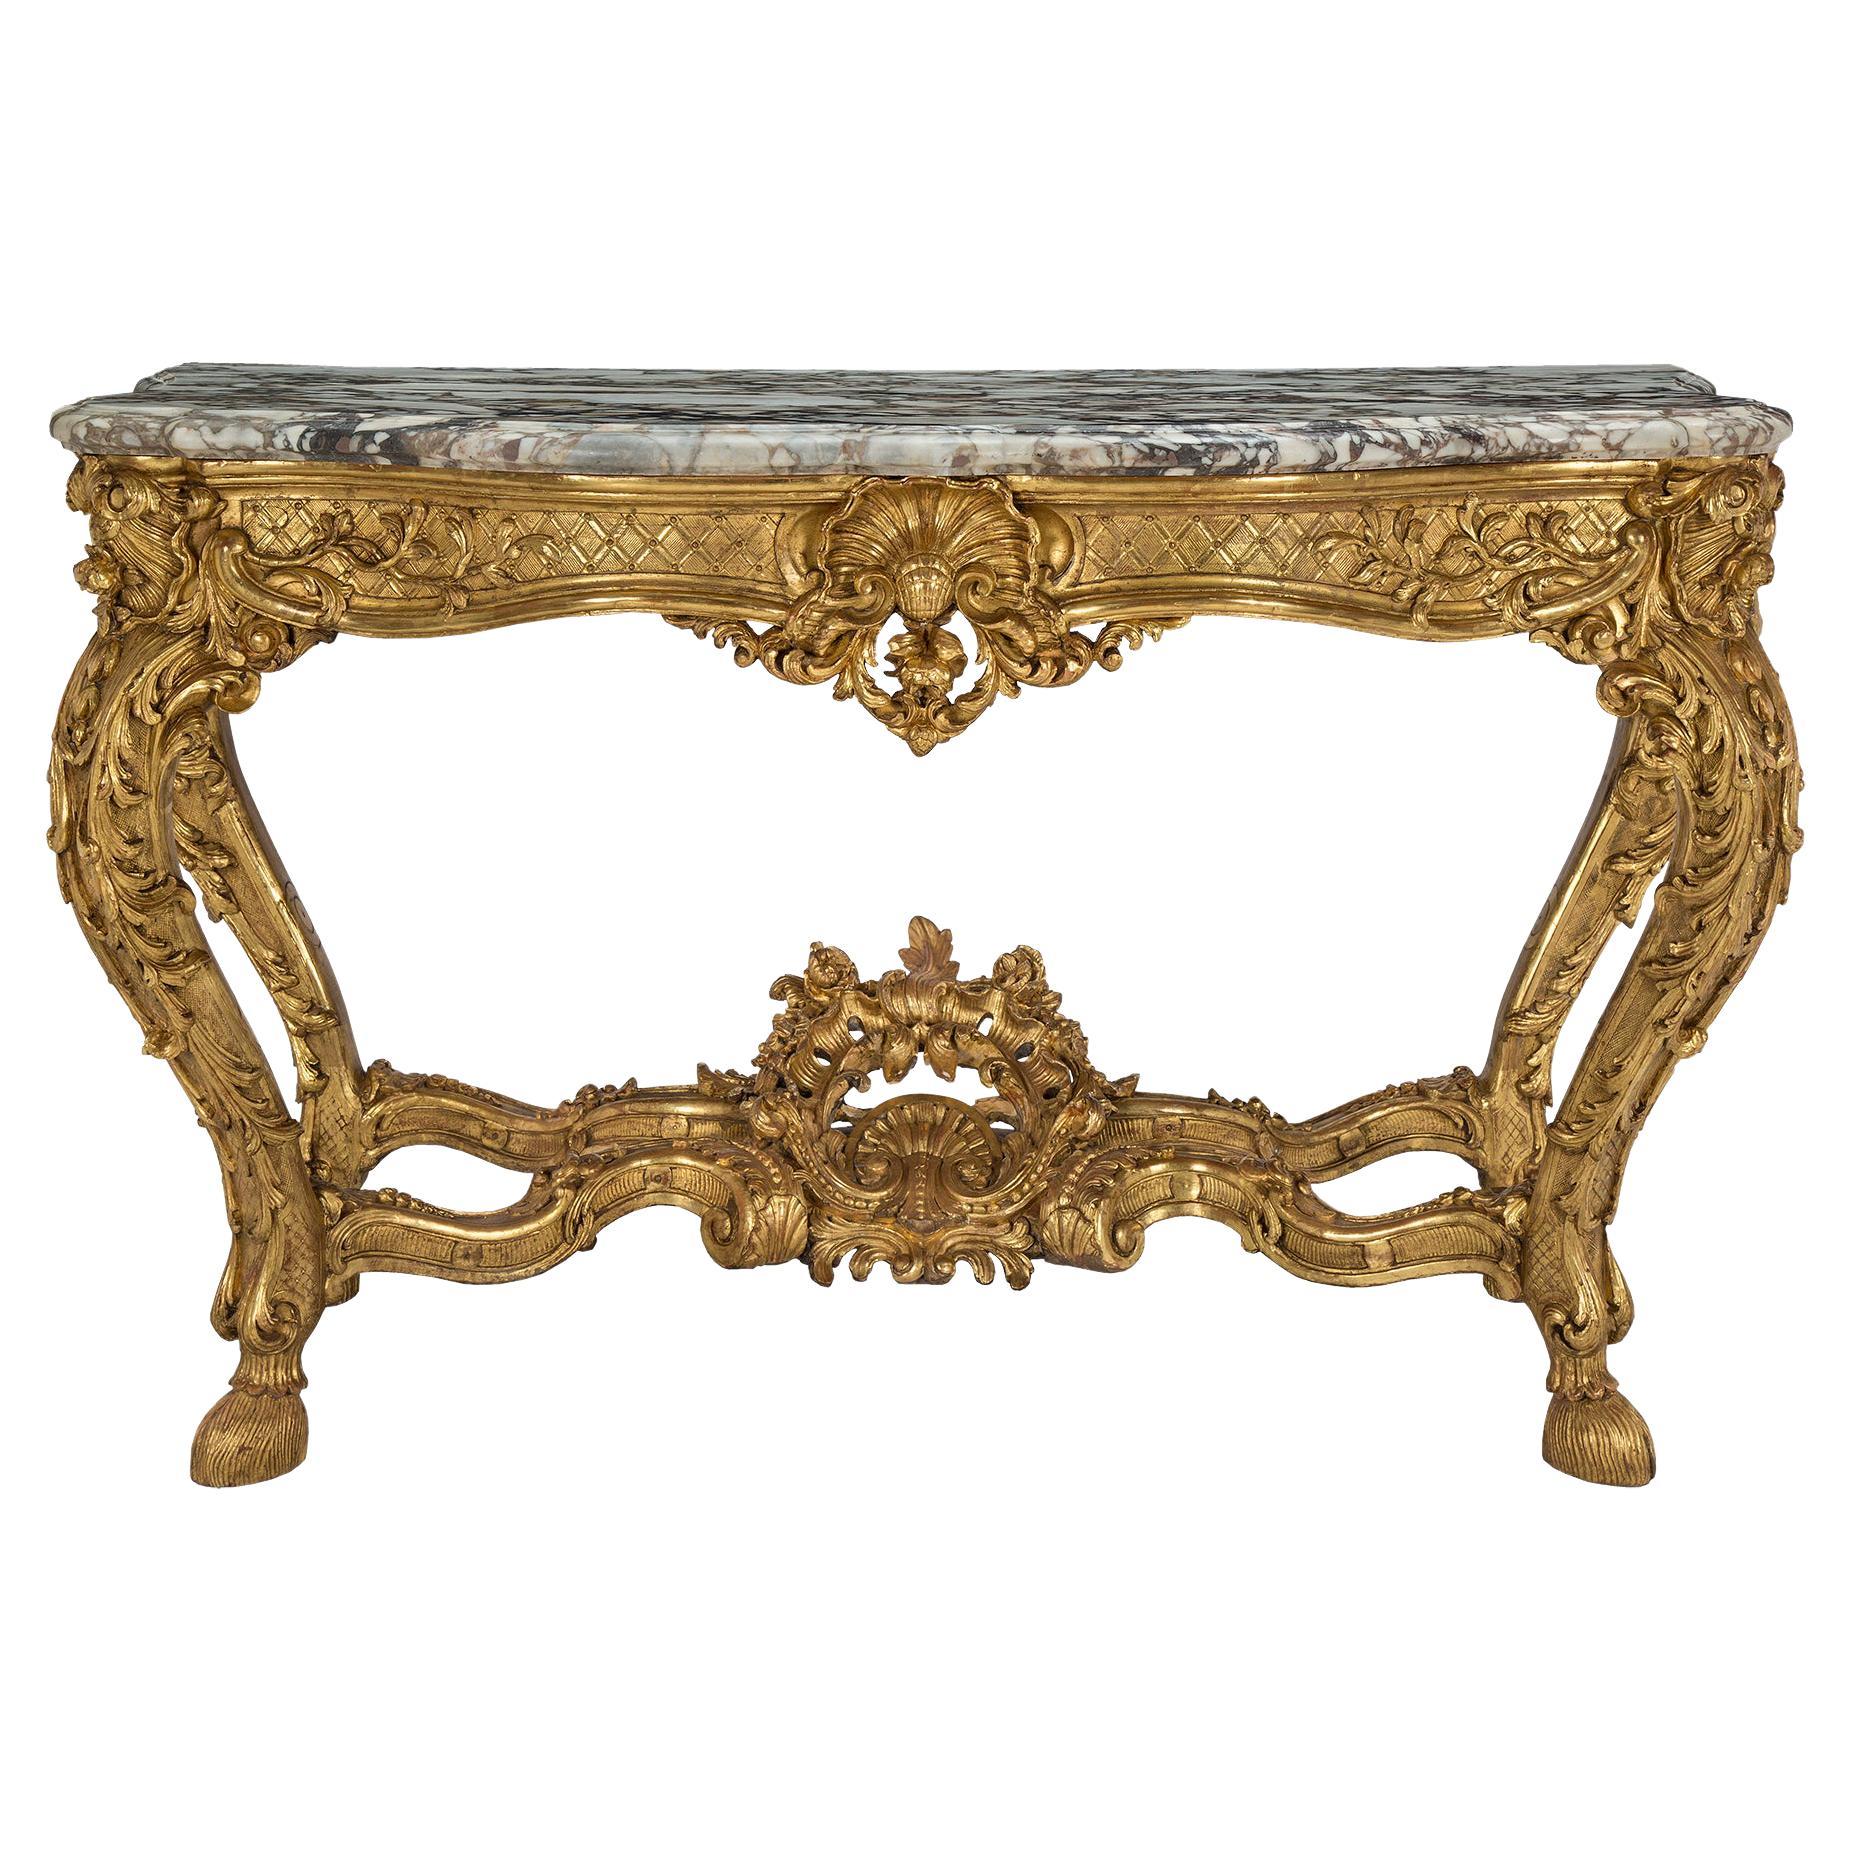 French 18th Century Regence Period Giltwood and Marble Freestanding Console For Sale